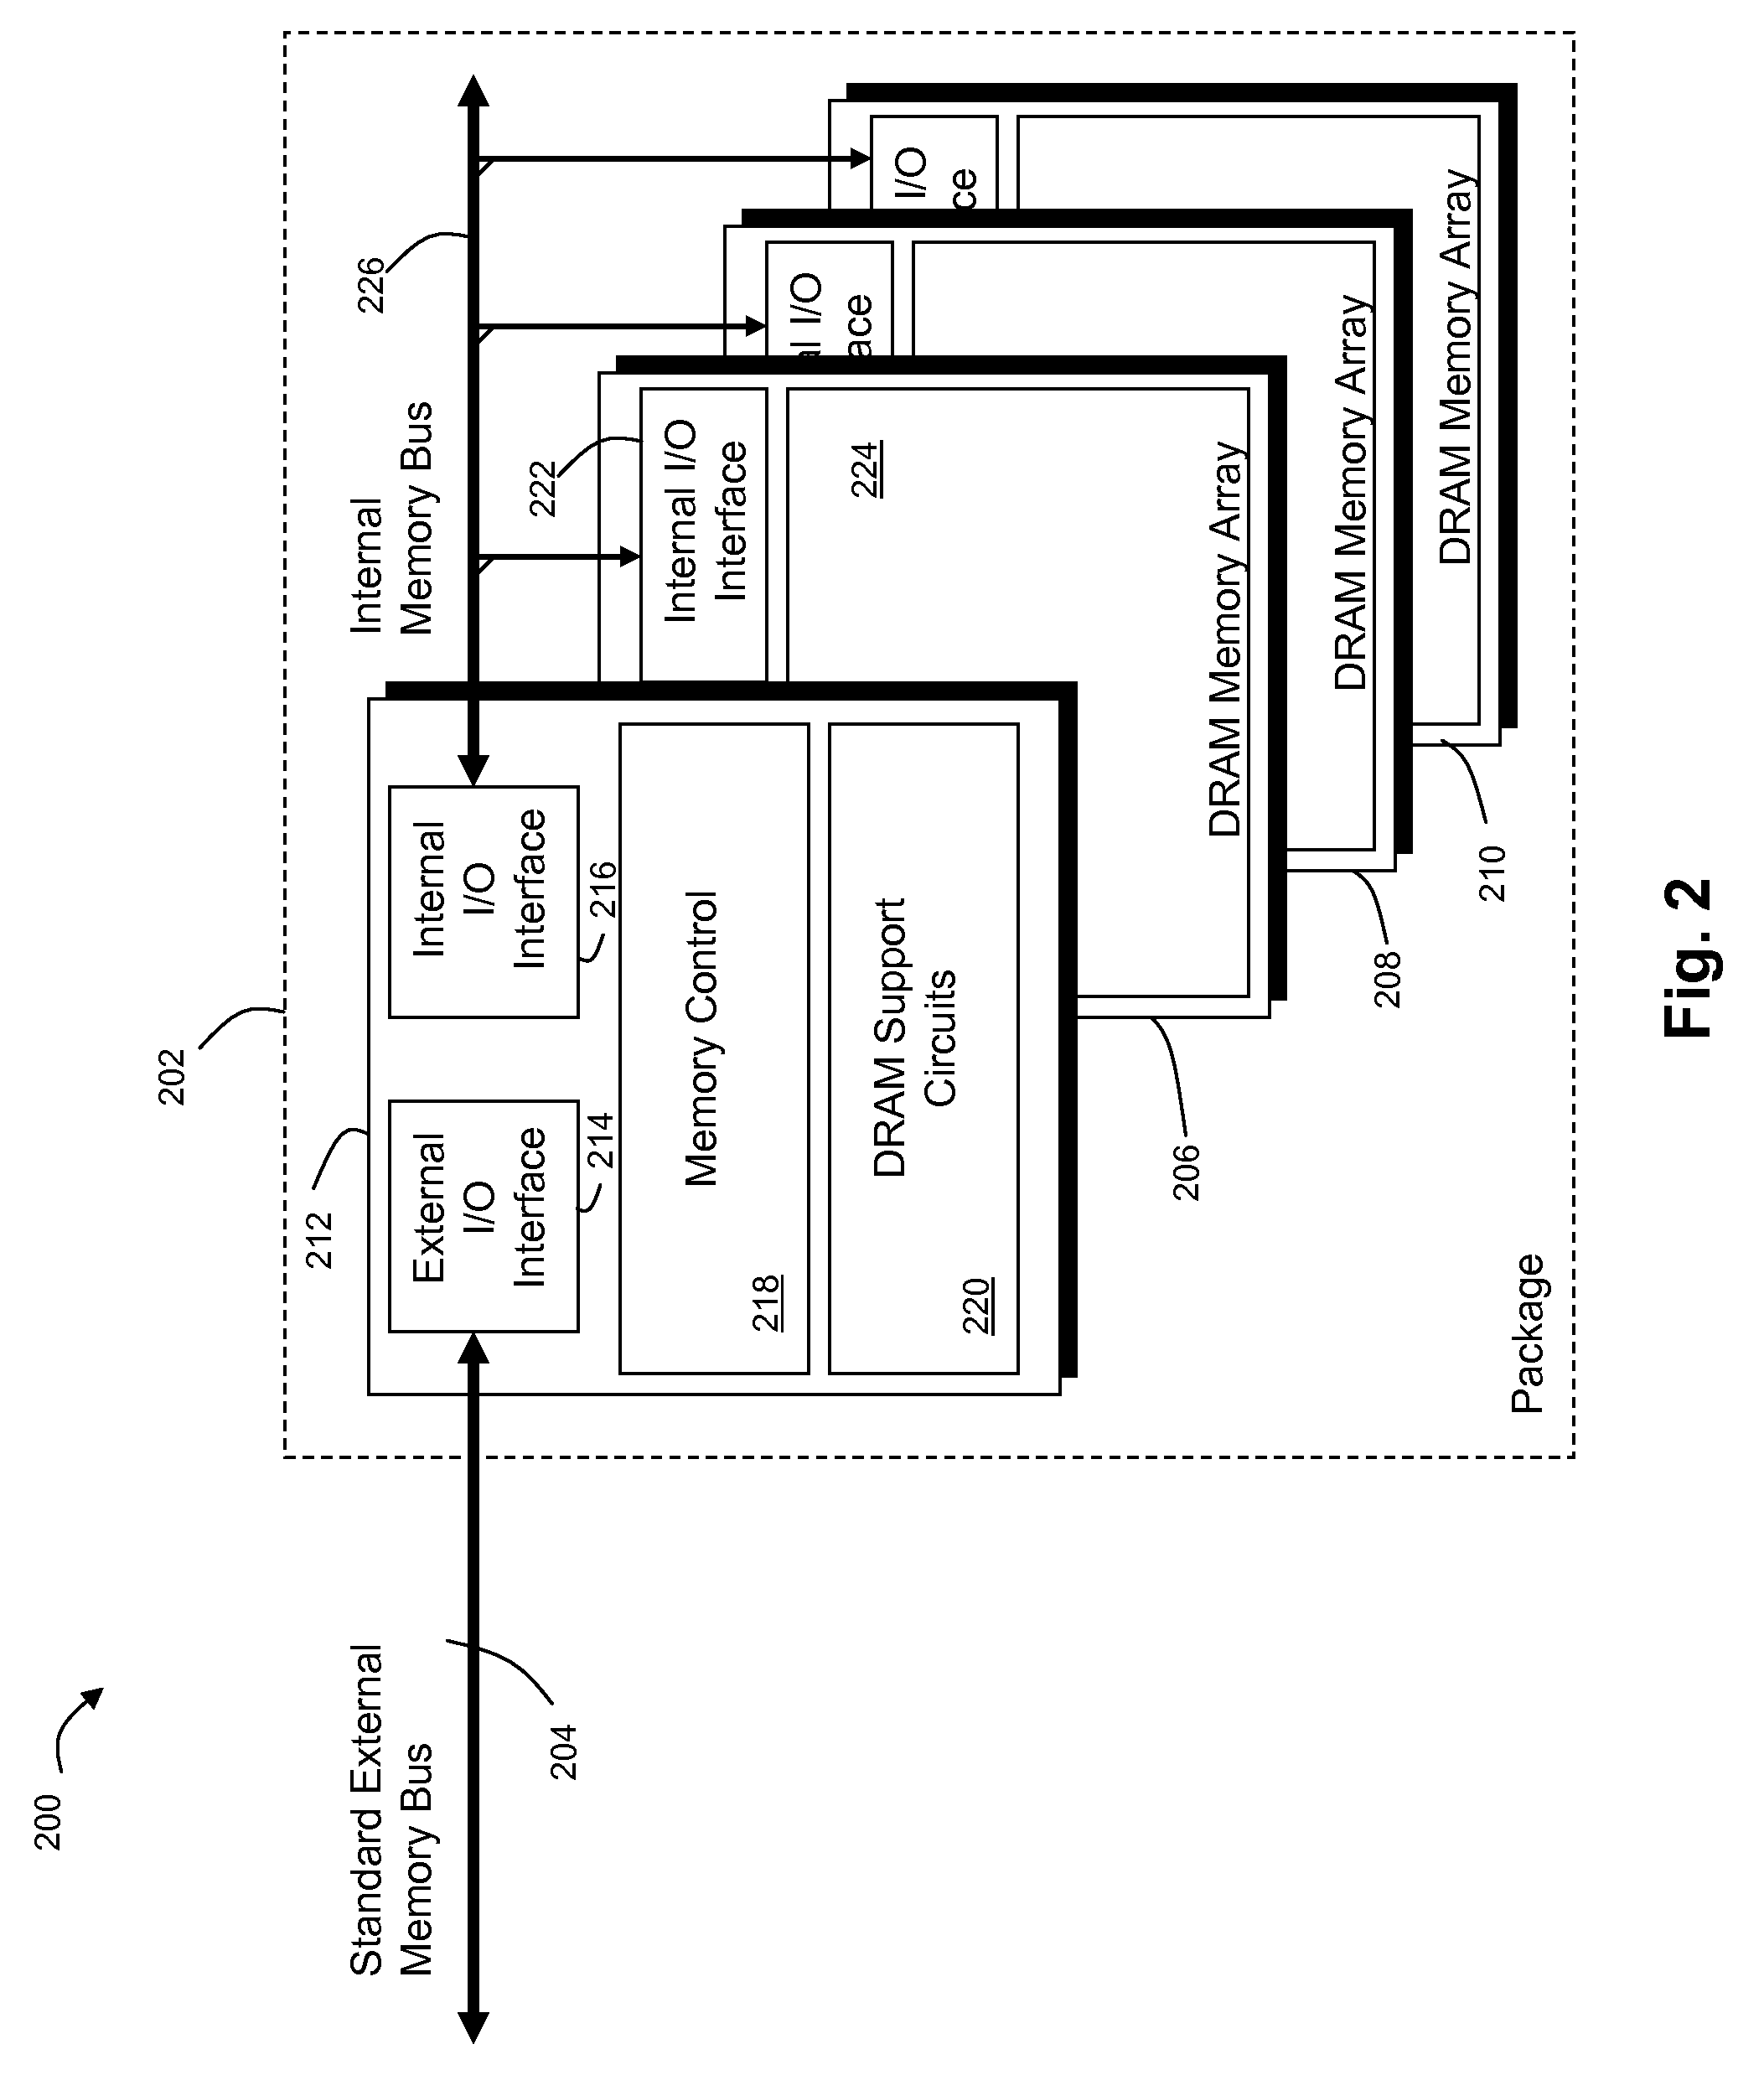 System and Method for Packaged Memory